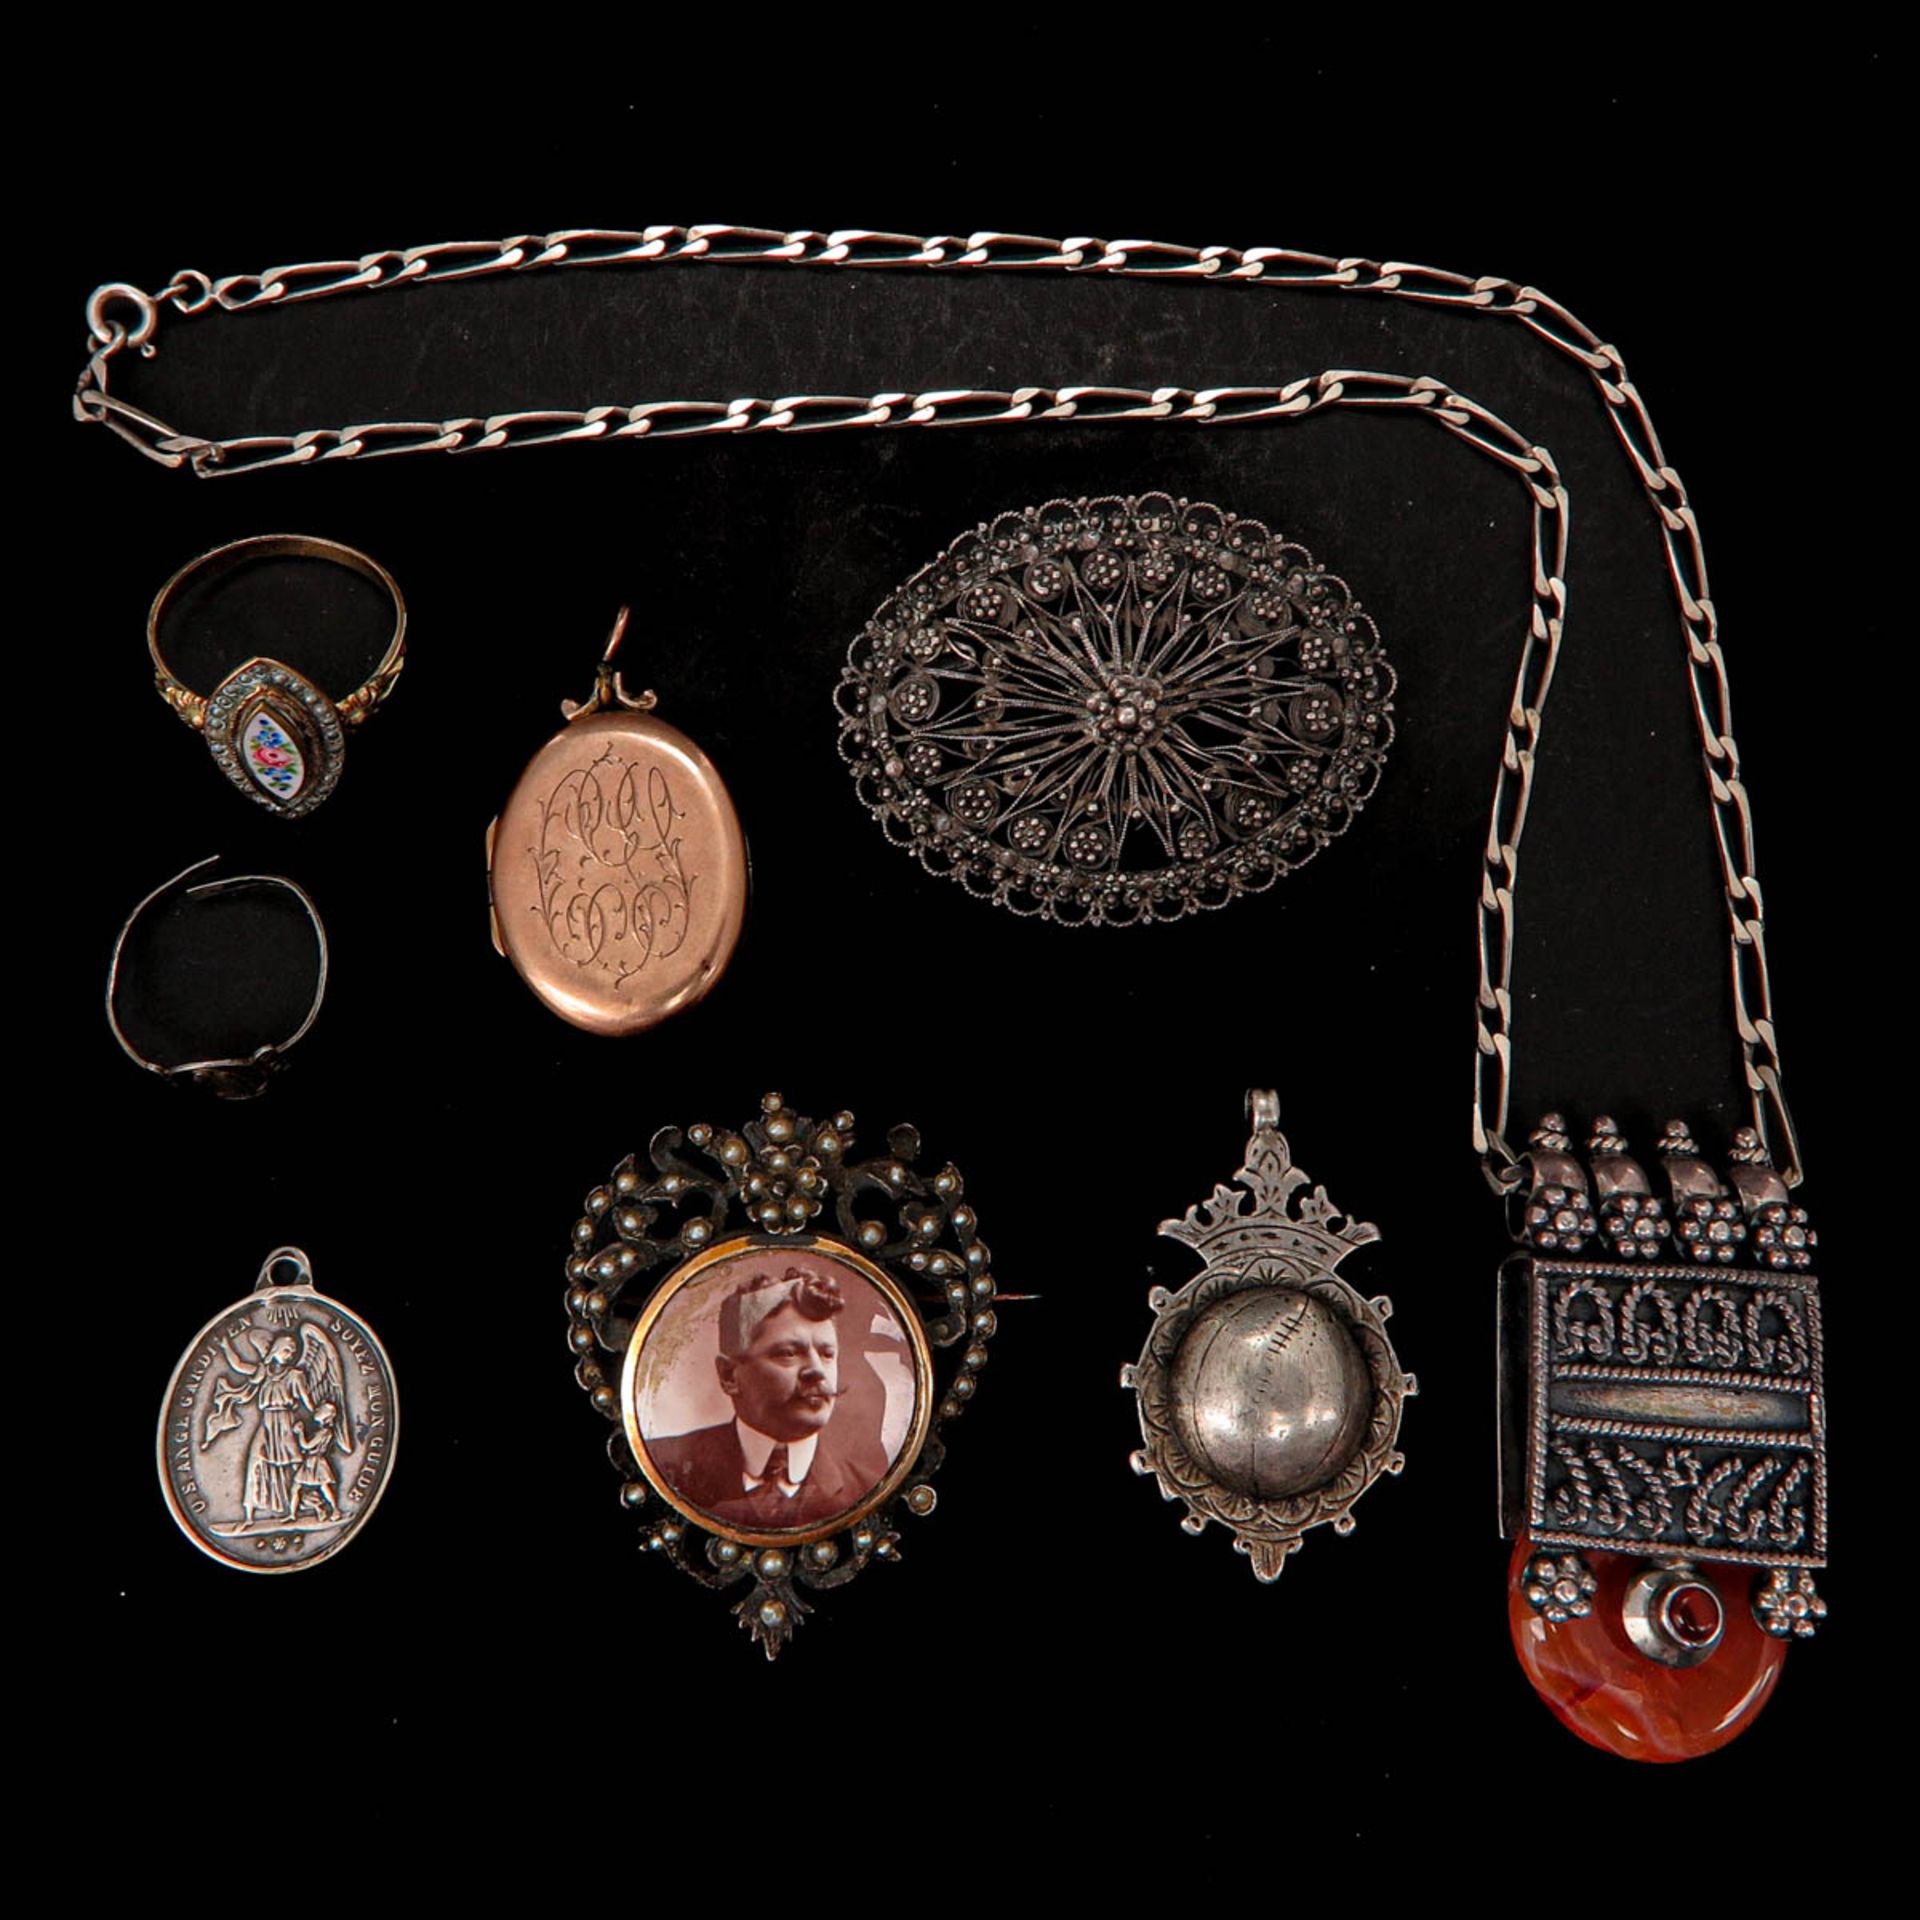 A Collection of Jewelry